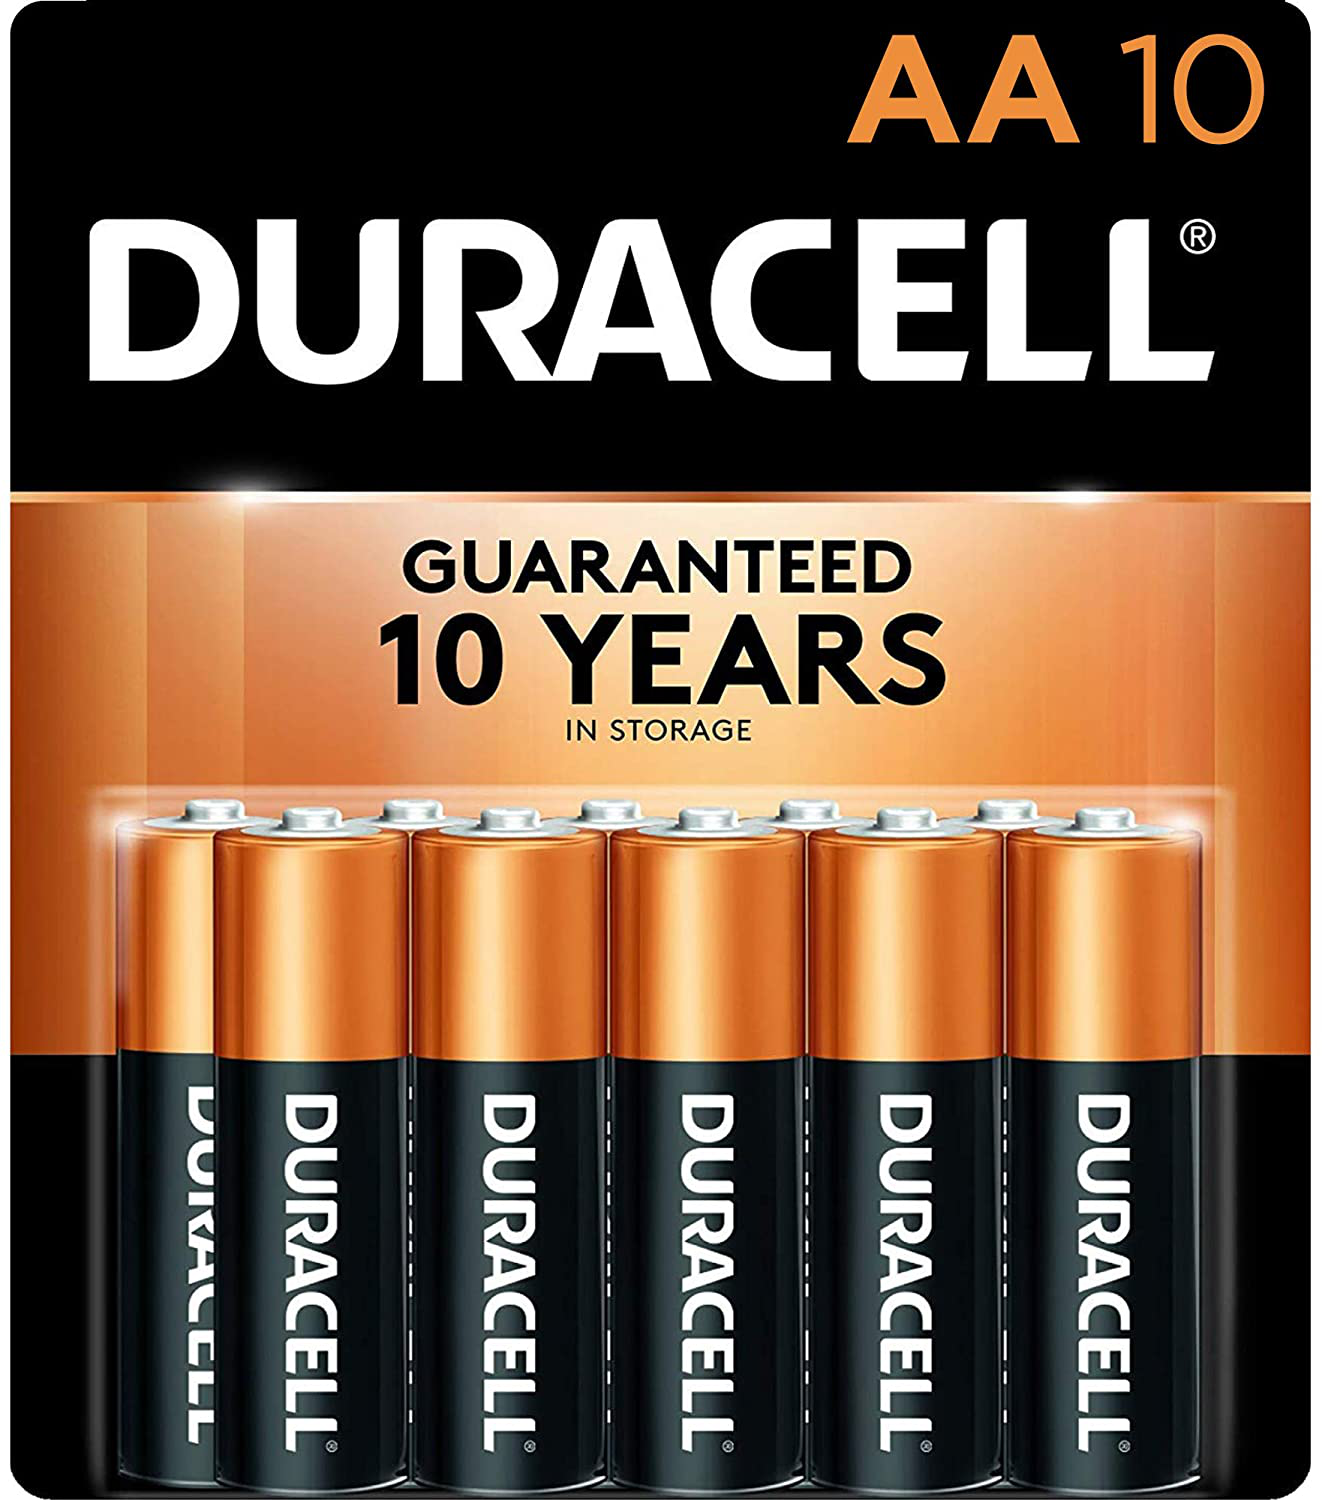 Duracell - CopperTop AA Alkaline Batteries - long lasting, all-purpose Double A battery for household and business